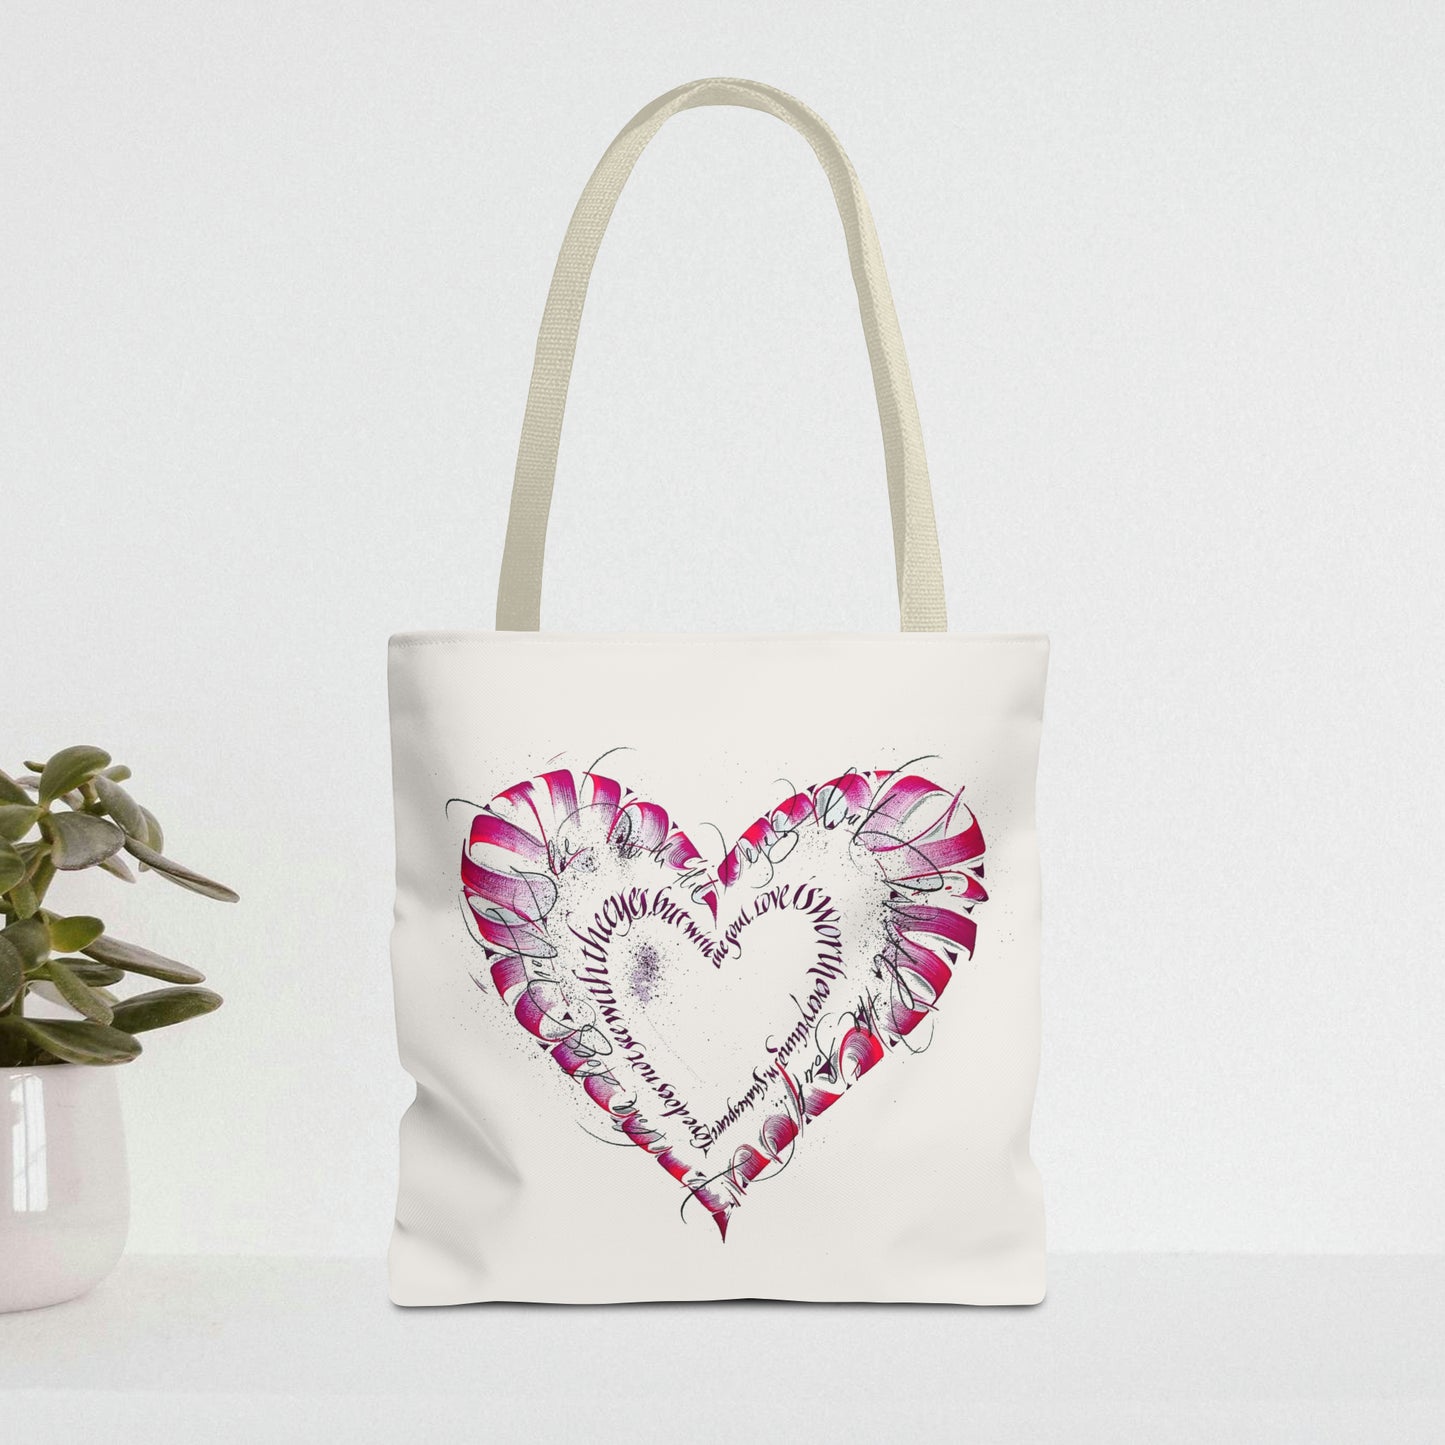 Tote Bag -  "Love doesn't see with the eyes"